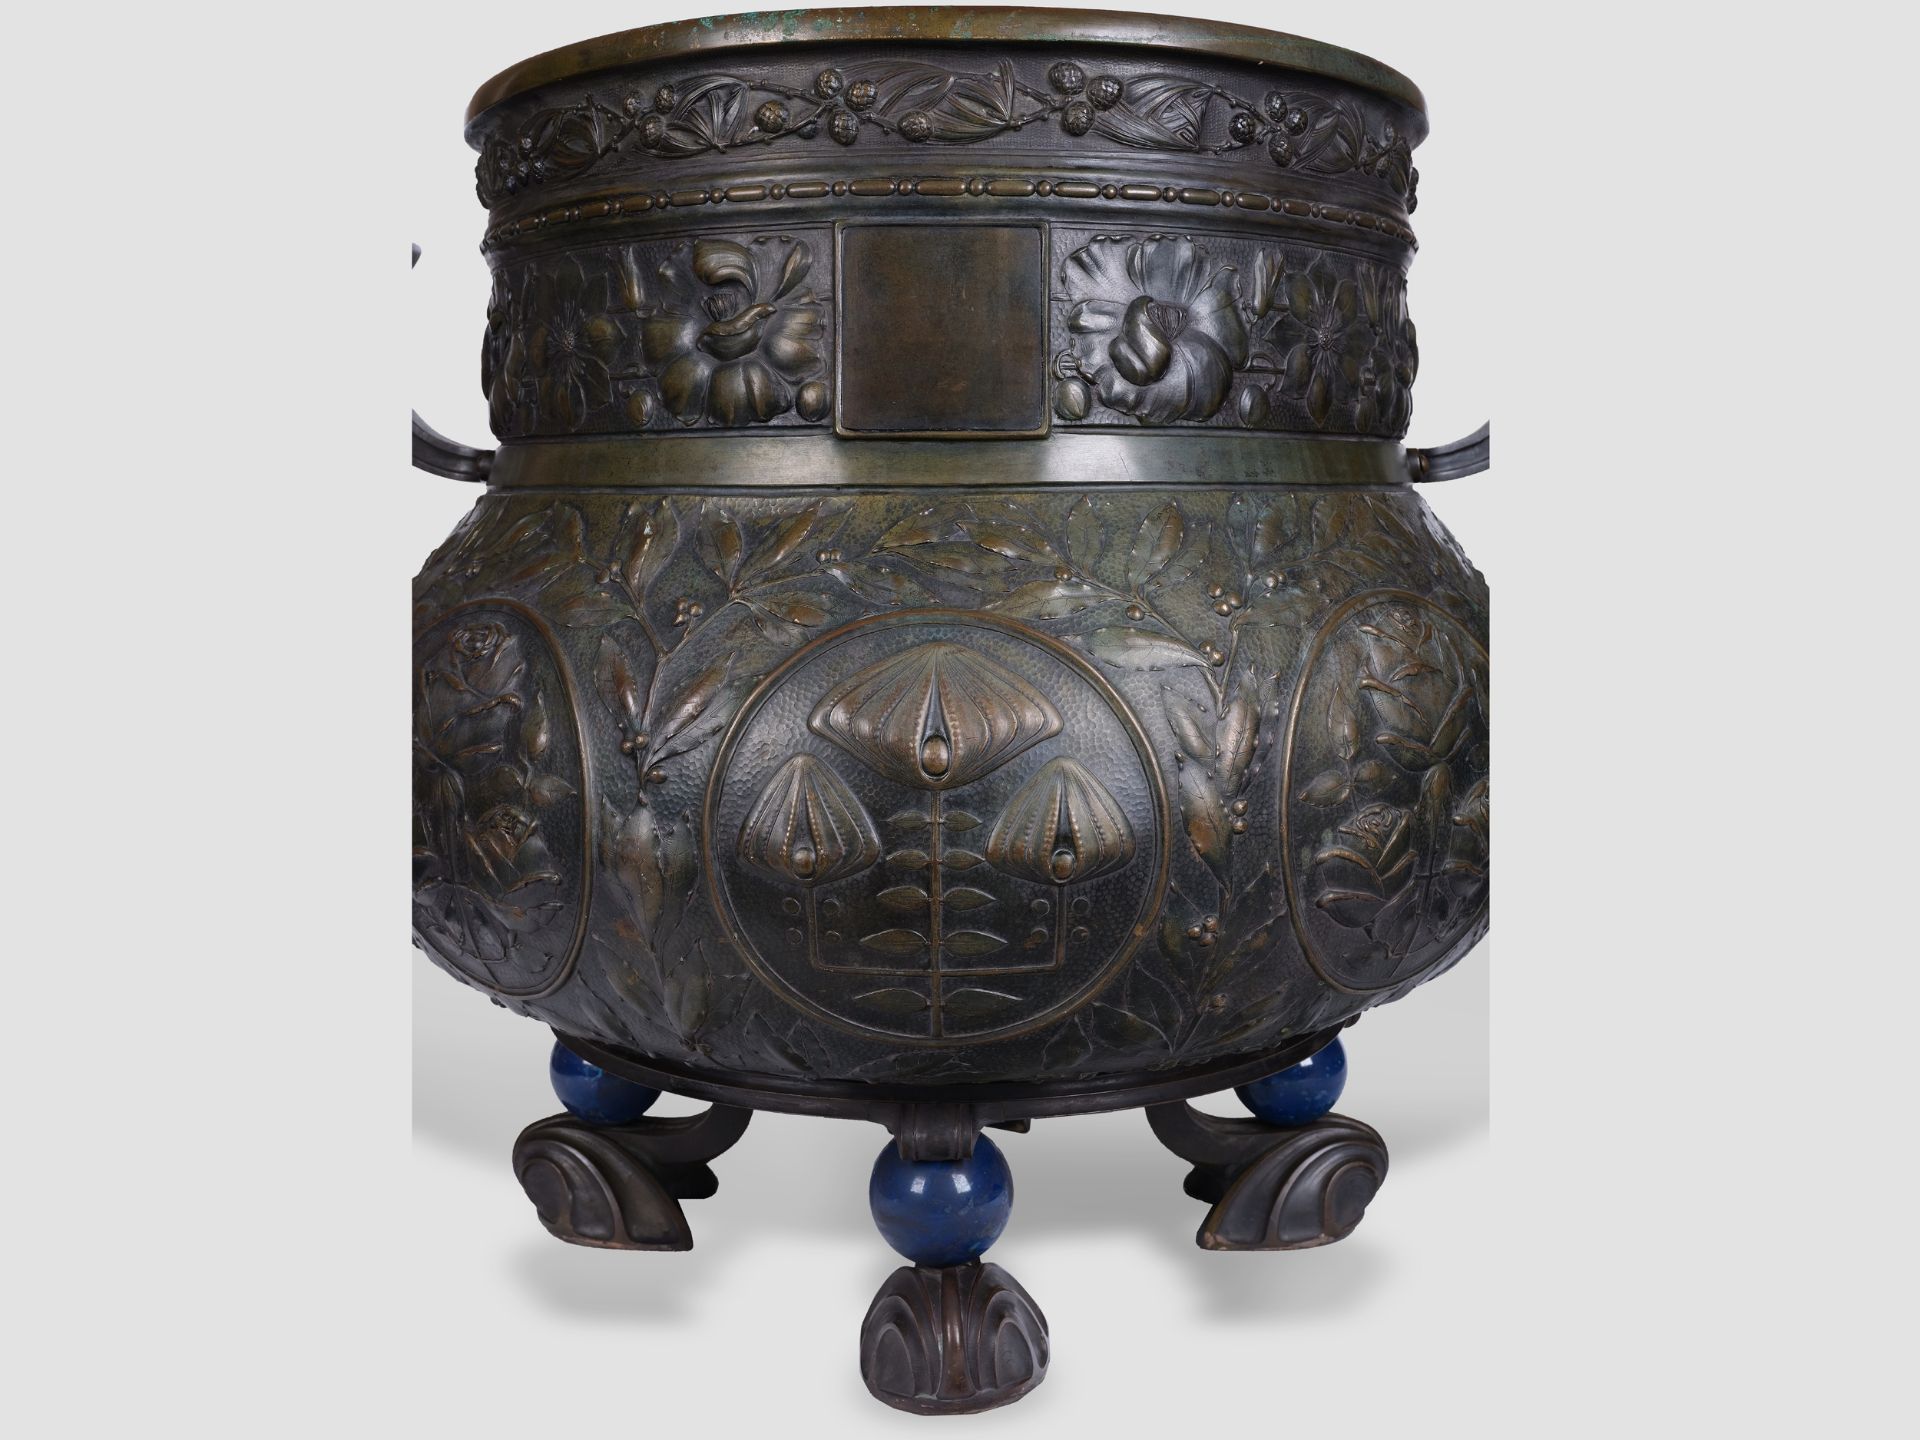 Highly important Russian planter, Modern style, Art Nuovo, Moscow around 1890/1900 - Image 7 of 12